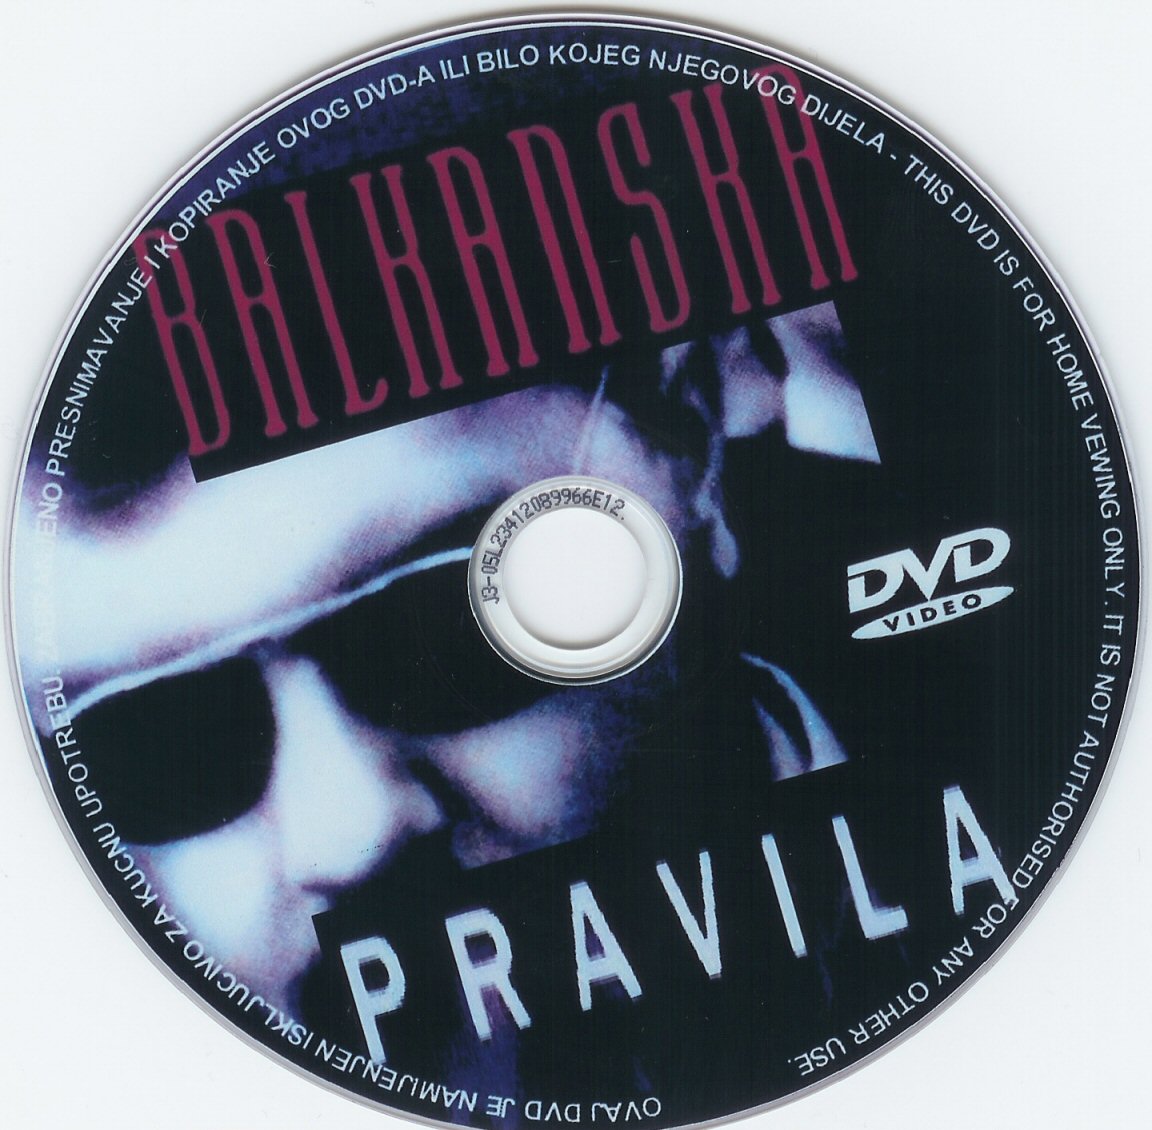 Click to view full size image -  DVD Cover - B - DVD - BALKANSKA PRAVILA - CD - DVD - BALKANSKA PRAVILA - CD.jpg